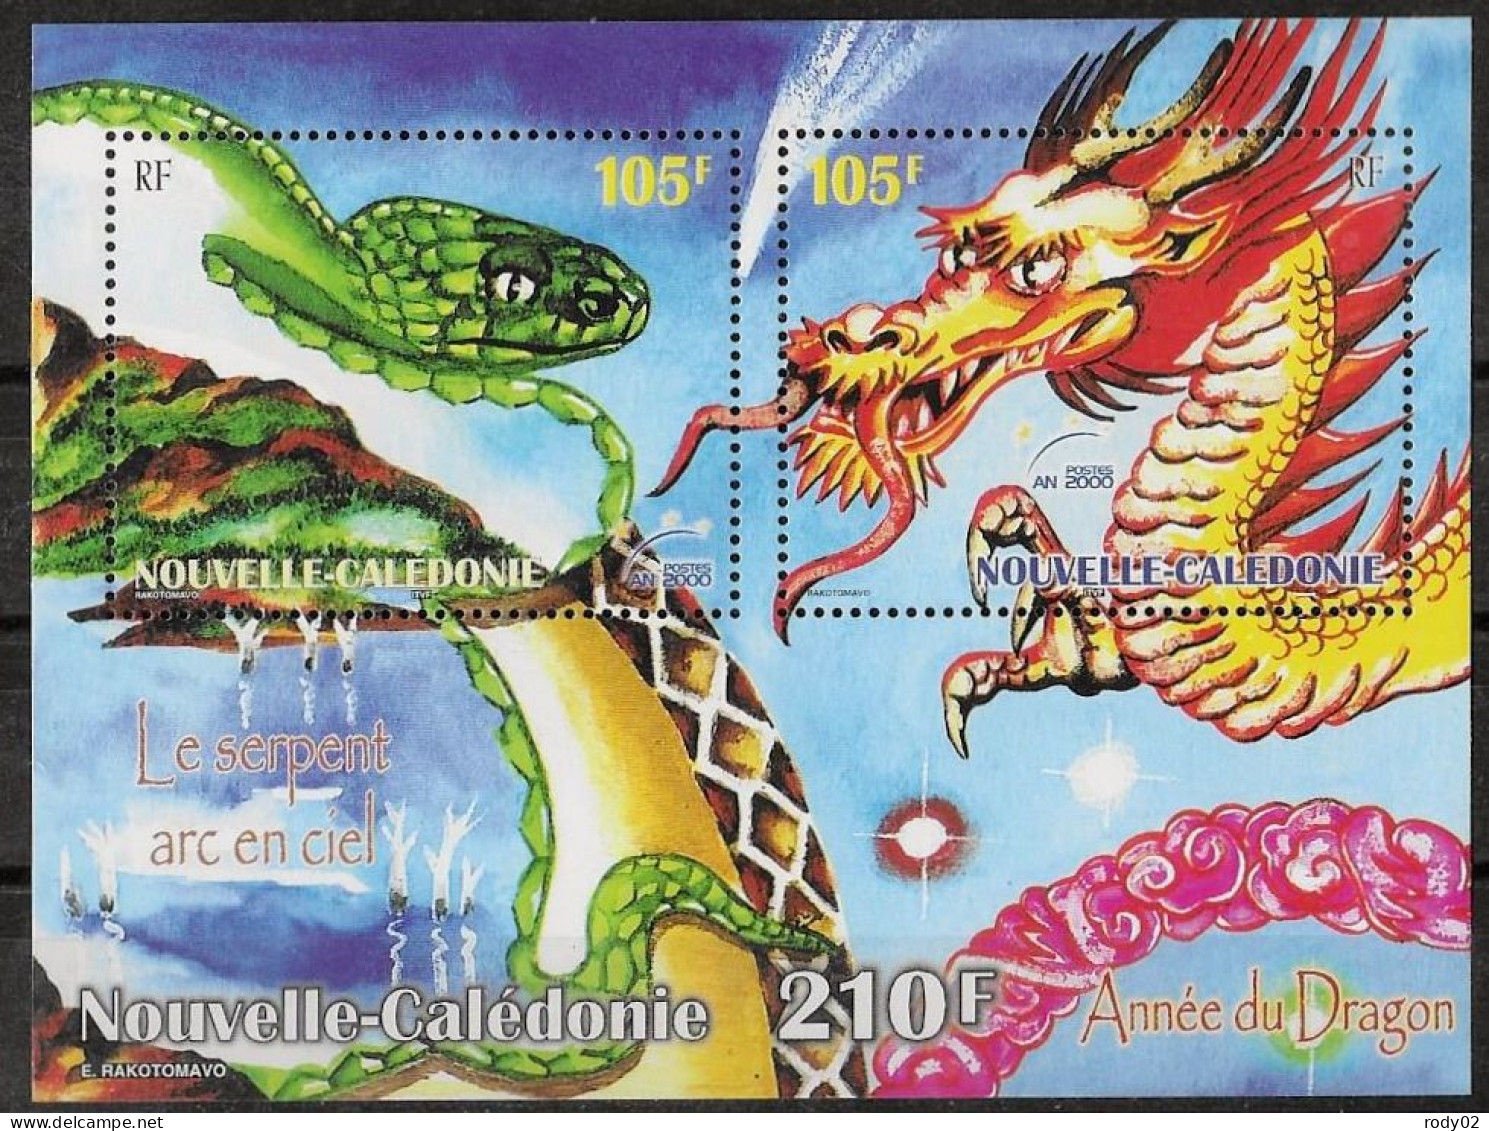 NOUVELLE-CALEDONIE - ANNEE LUNAIRE CHINOISE DU DRAGON - BF 23 - NEUF** MNH - Hojas Y Bloques